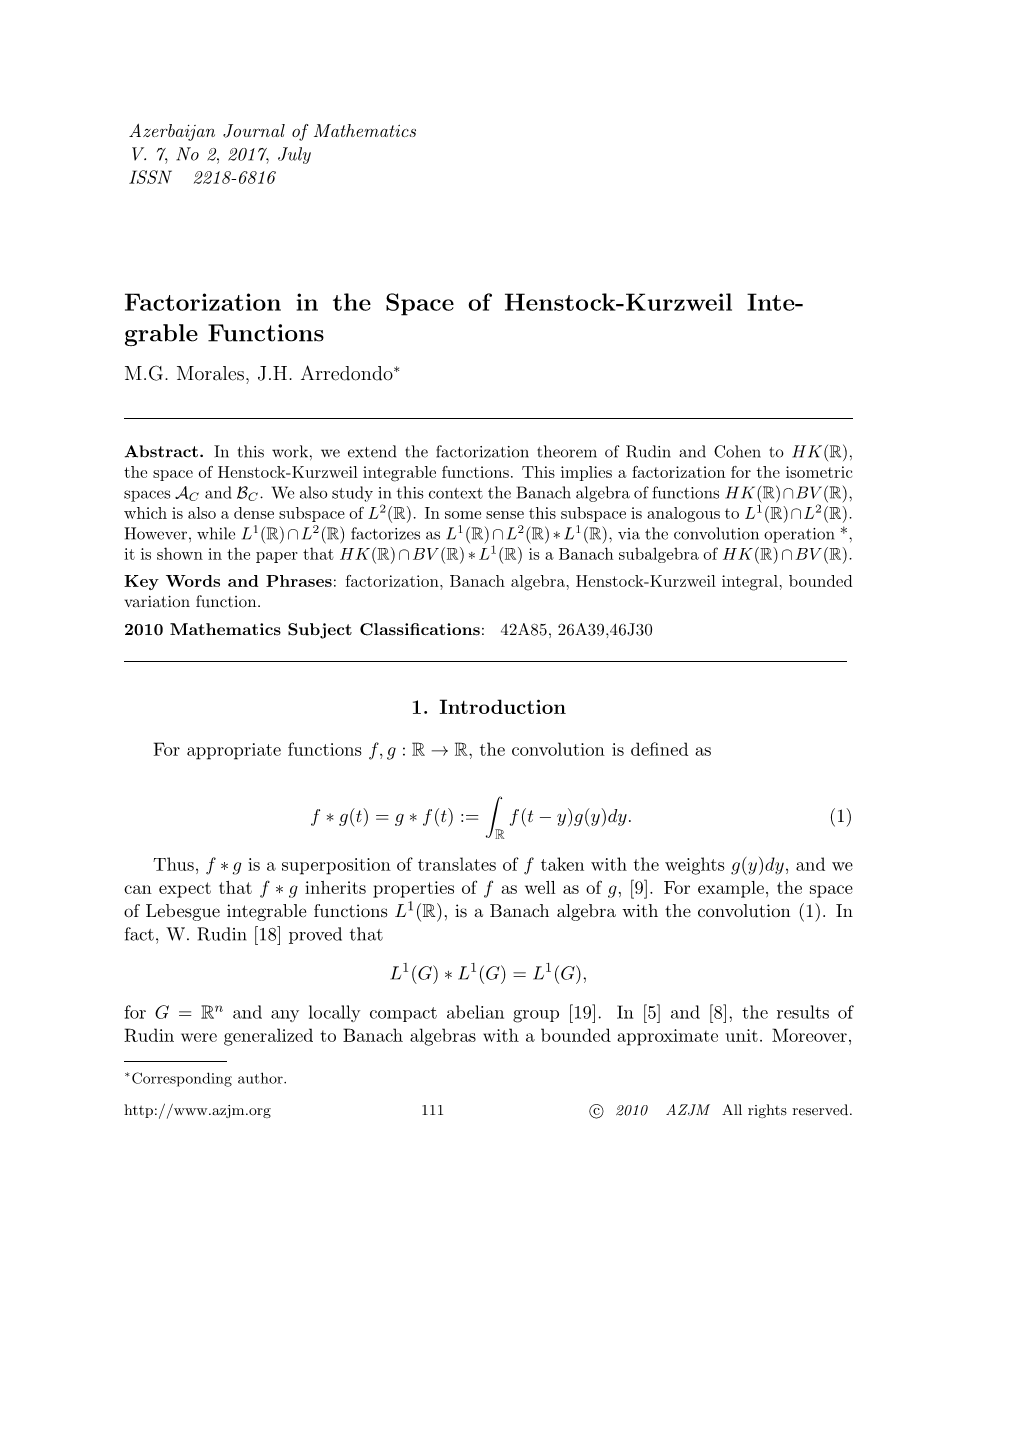 Factorization in the Space of Henstock-Kurzweil Integrable Functions